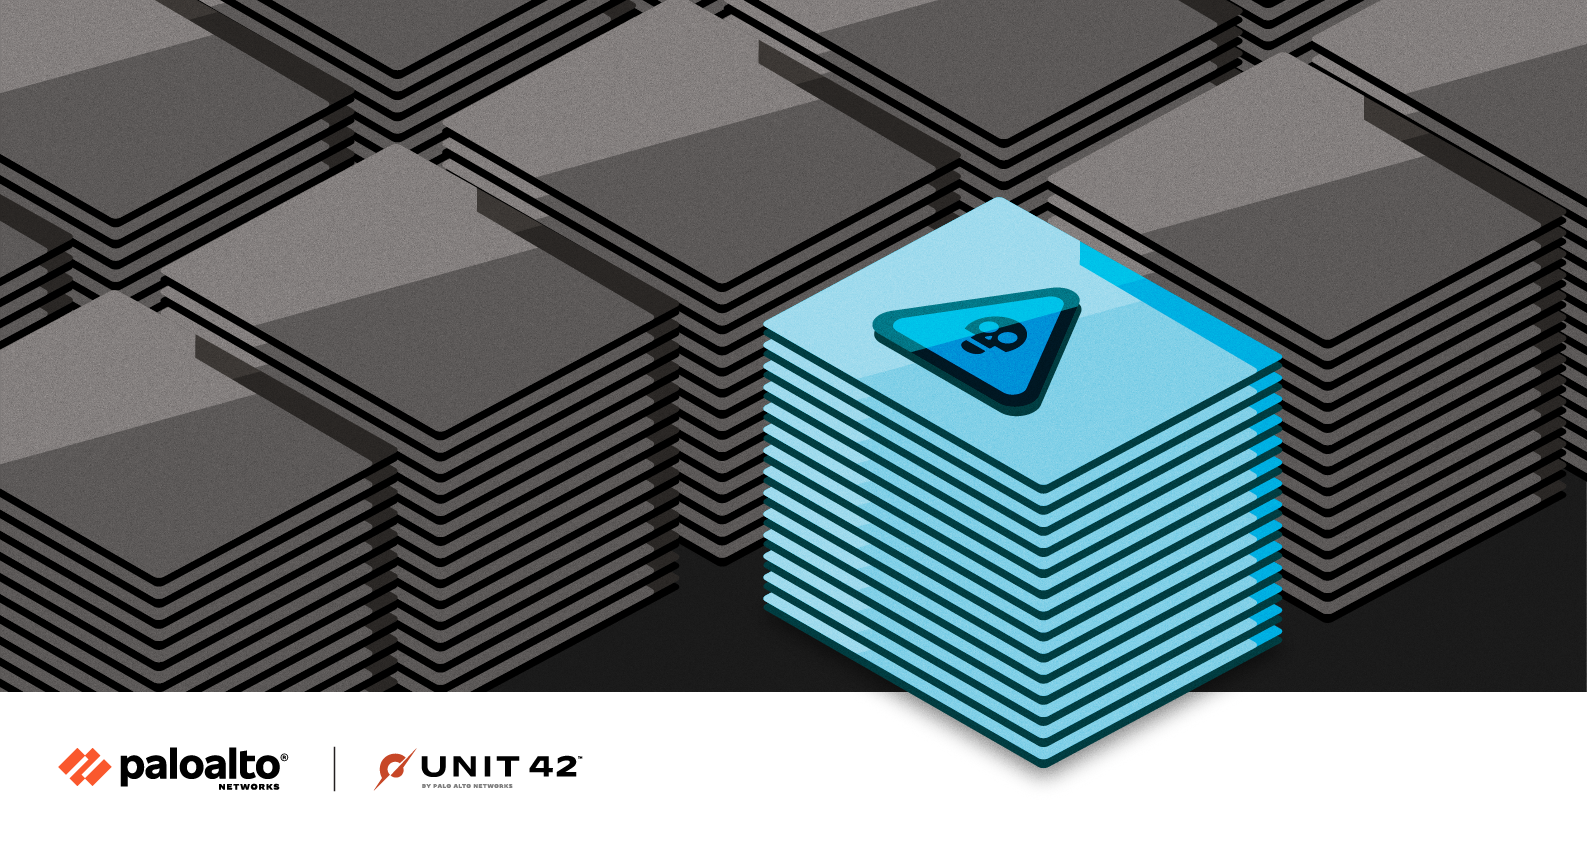 A pictorial representation of DNS tunneling. Stacks of folders are in rows. One column of folders is a contrasting color topped with a skull icon within a triangle. The Palo Alto Networks and Unit 42 logos.